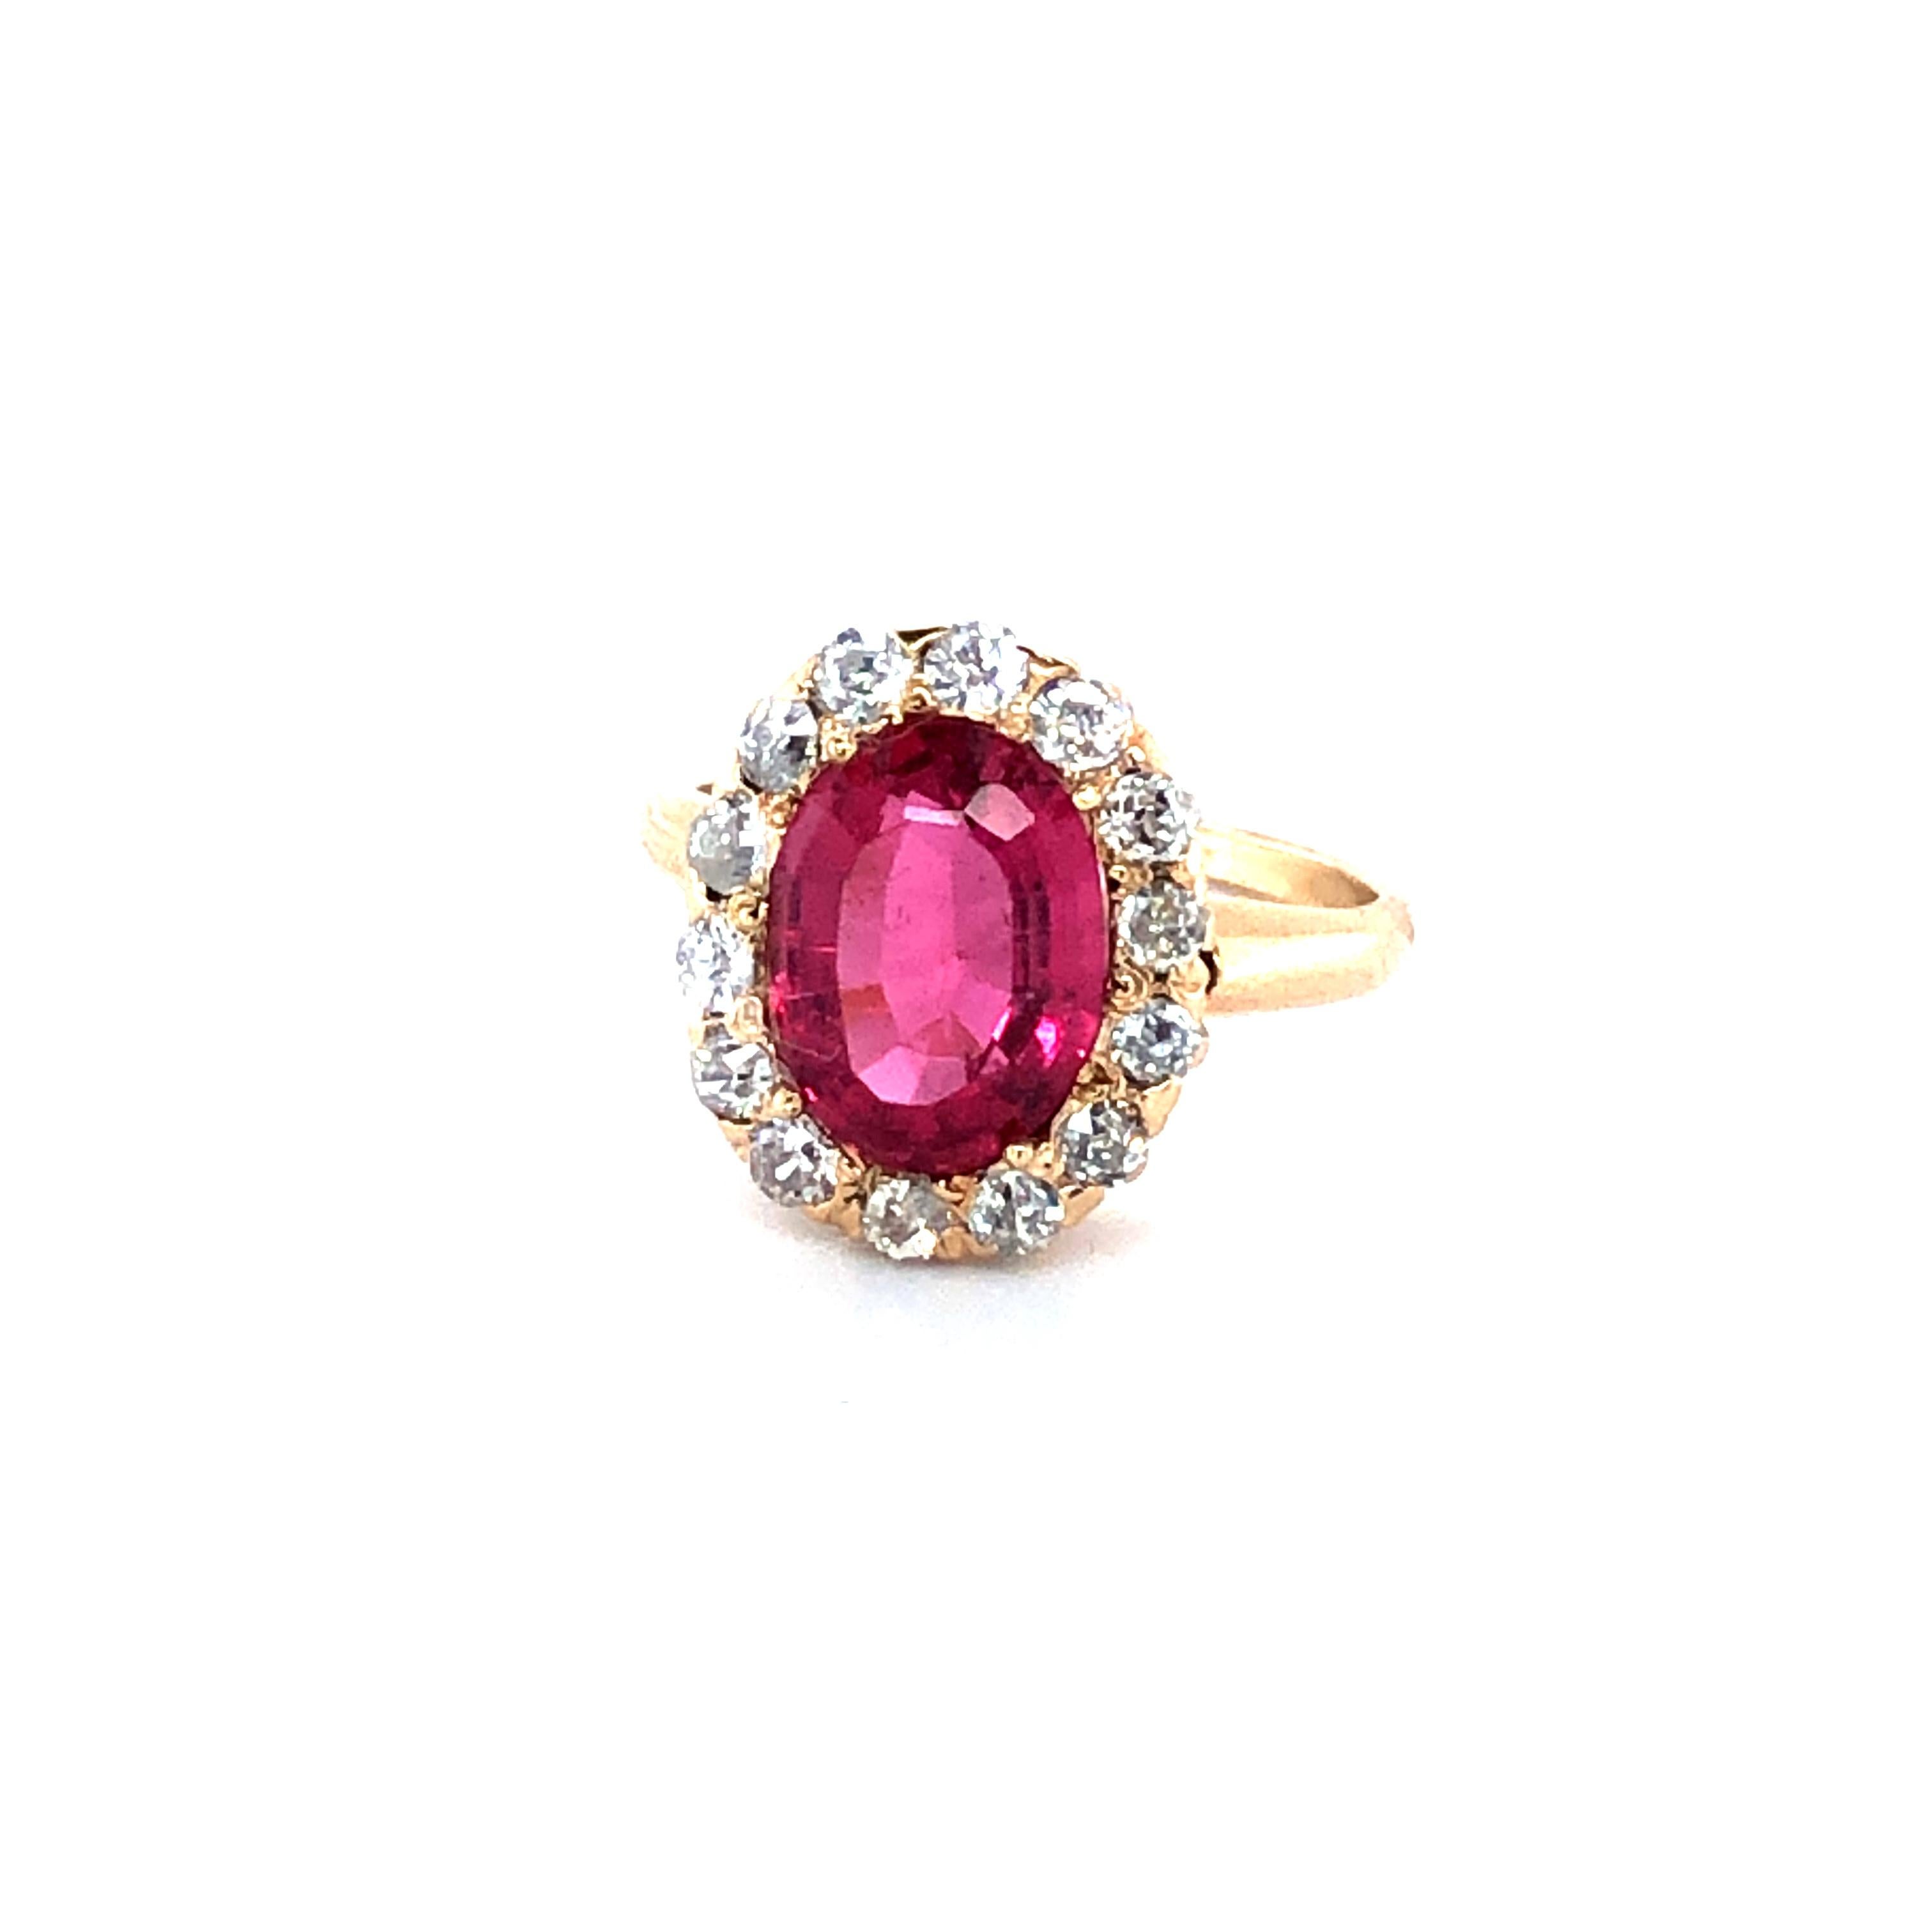 Offered here is a classic Diana engagement ring from way before princess Diana made this style popular, circa early 1900.
Featuring one natural earth mined beautiful pinkish-red ruby weighing approximately 2.00 carats, framed with 14 natural earth